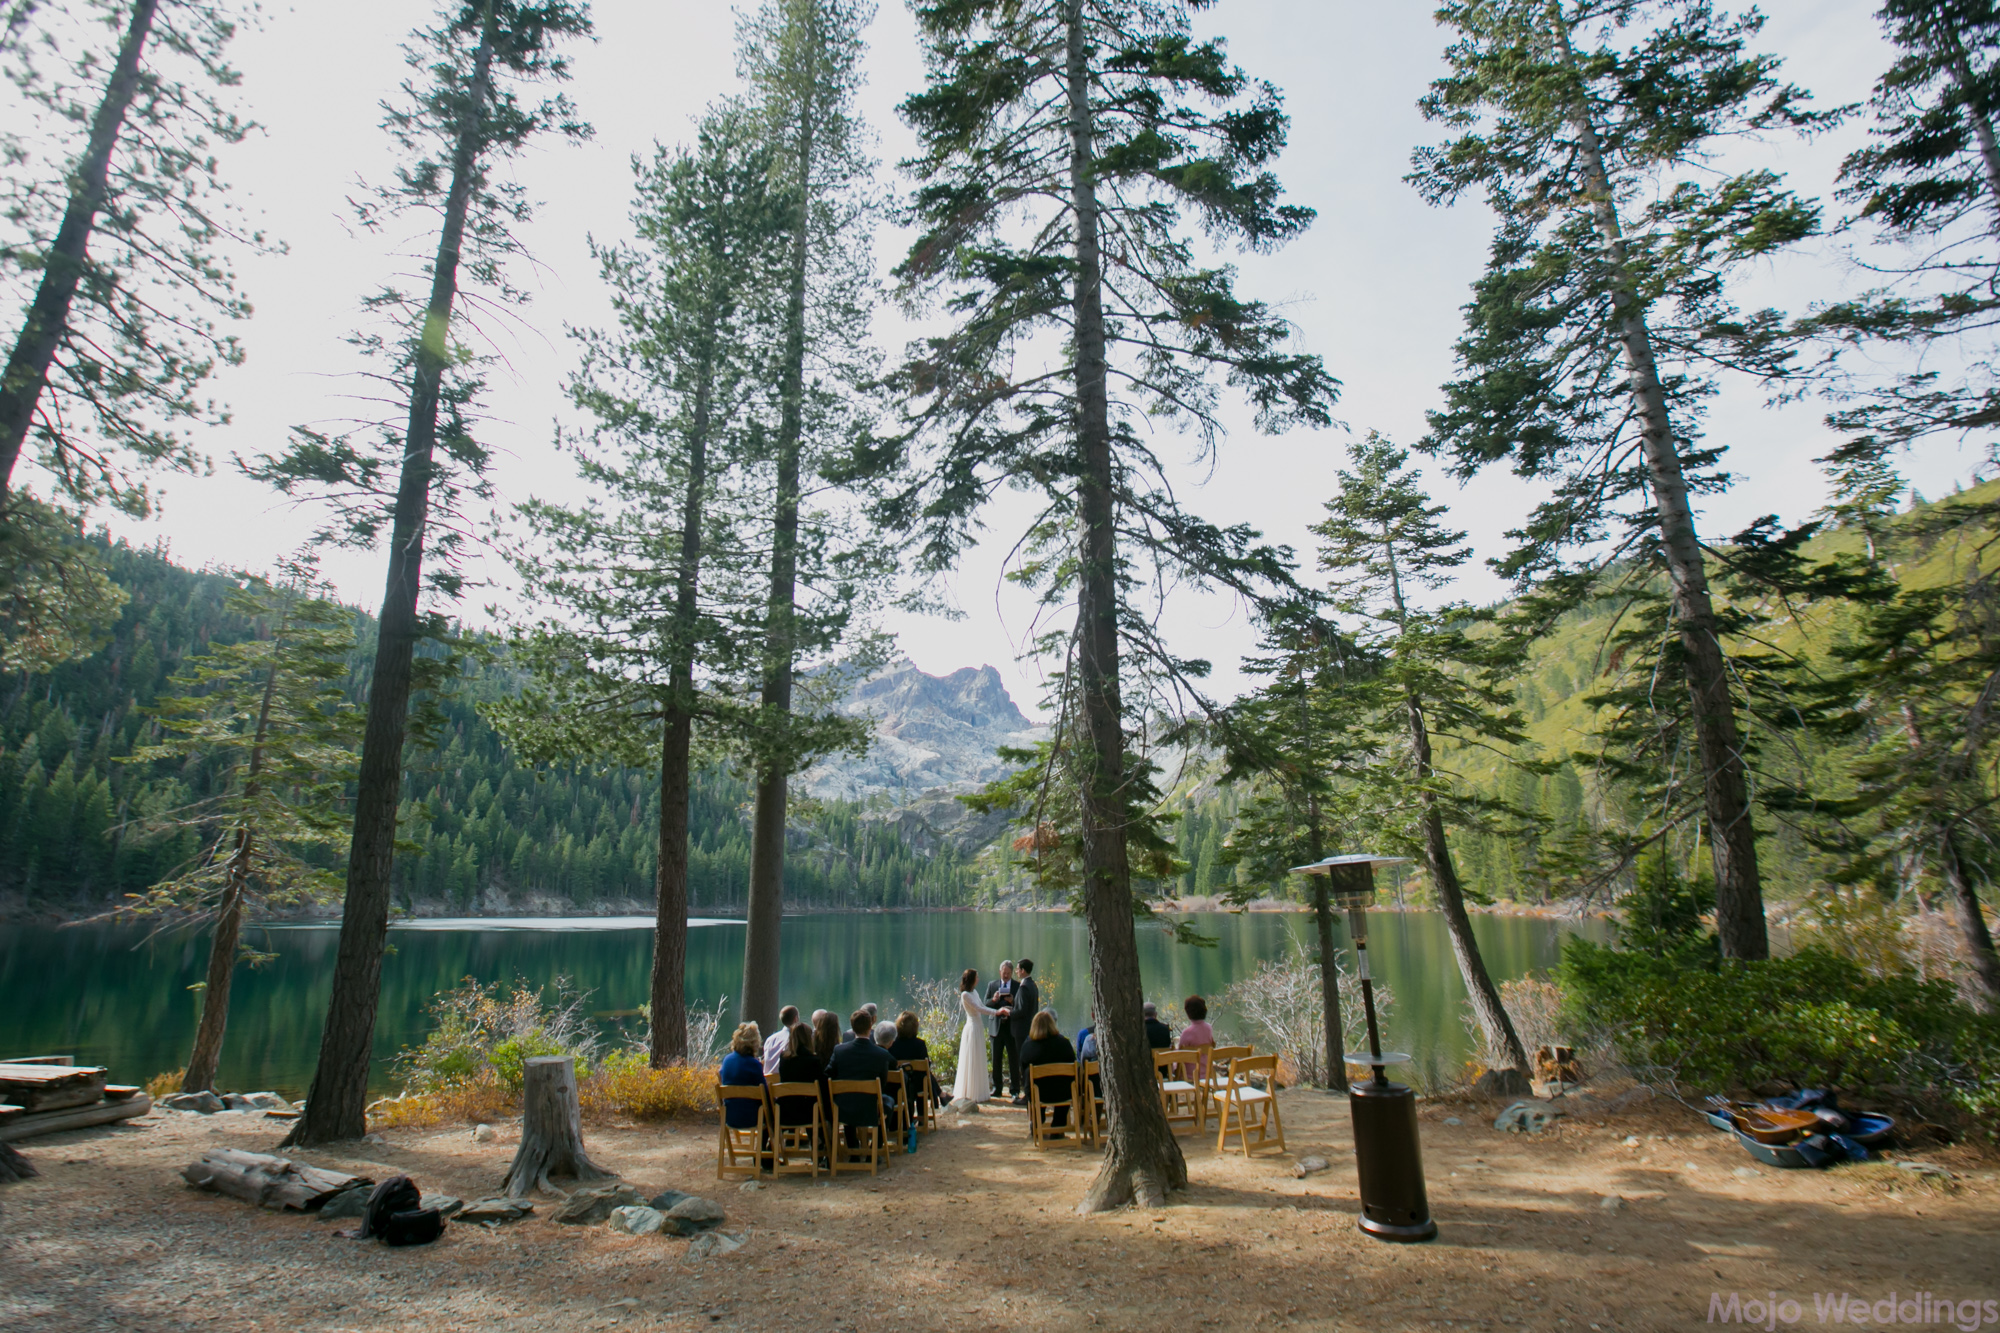 A very wide look at the entire ceremony showing all the guests, trees, and mountains surrounding them.